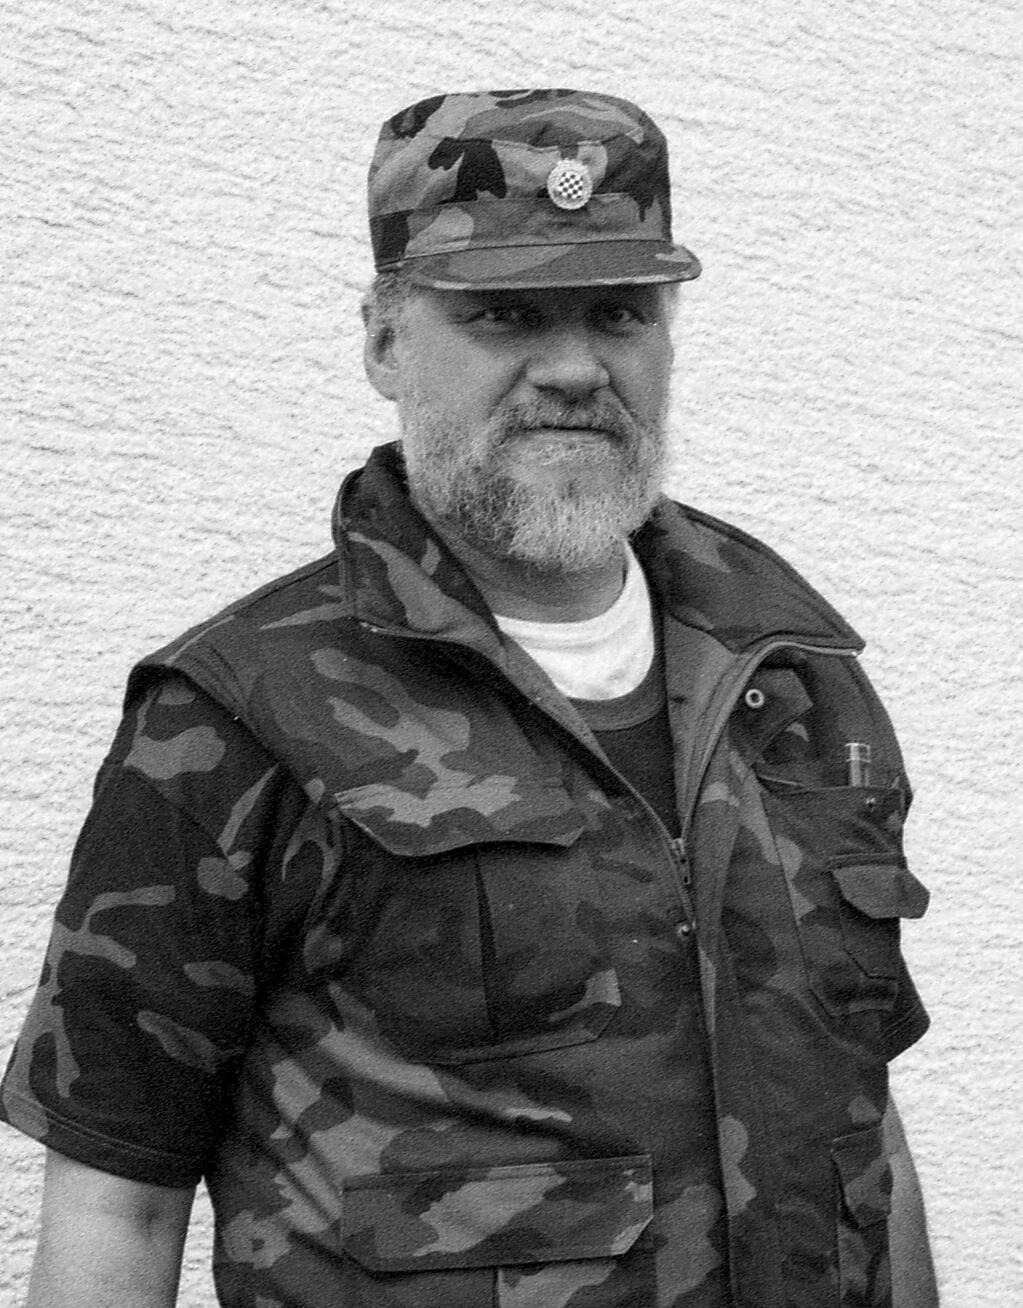 In this Sept. 1991 photo, Slobodan Praljak poses near a front-line in Sunja, Croatia. Slobodan Praljak stunned the International Criminal Tribunal for the former Yugoslavia on Wednesday, Nov. 29, 2017, when he gulped down liquid from a small bottle seconds after a U.N. appeals judge had confirmed a 20-year sentence against him. Praljak was convicted in 2013 of crimes including murder, persecution and deportation for his role in a plan to carve out a Bosnian Croat ministate in Bosnia in the early 1990s. (AP Photo/Darko Bandic)